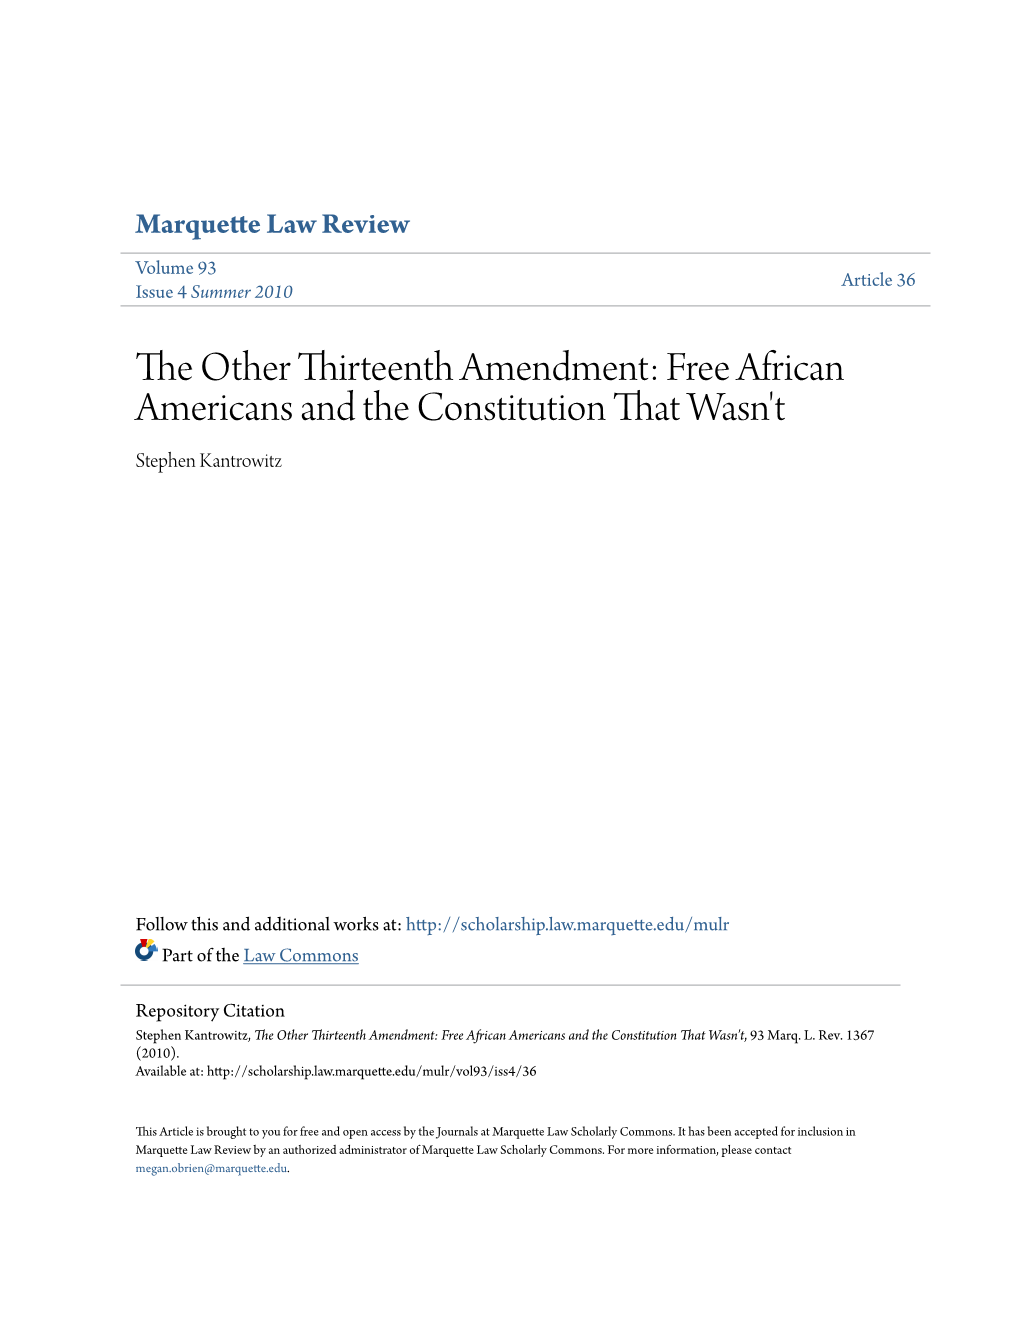 The Other Thirteenth Amendment: Free African Americans and the Constitution That Wasn't Stephen Kantrowitz